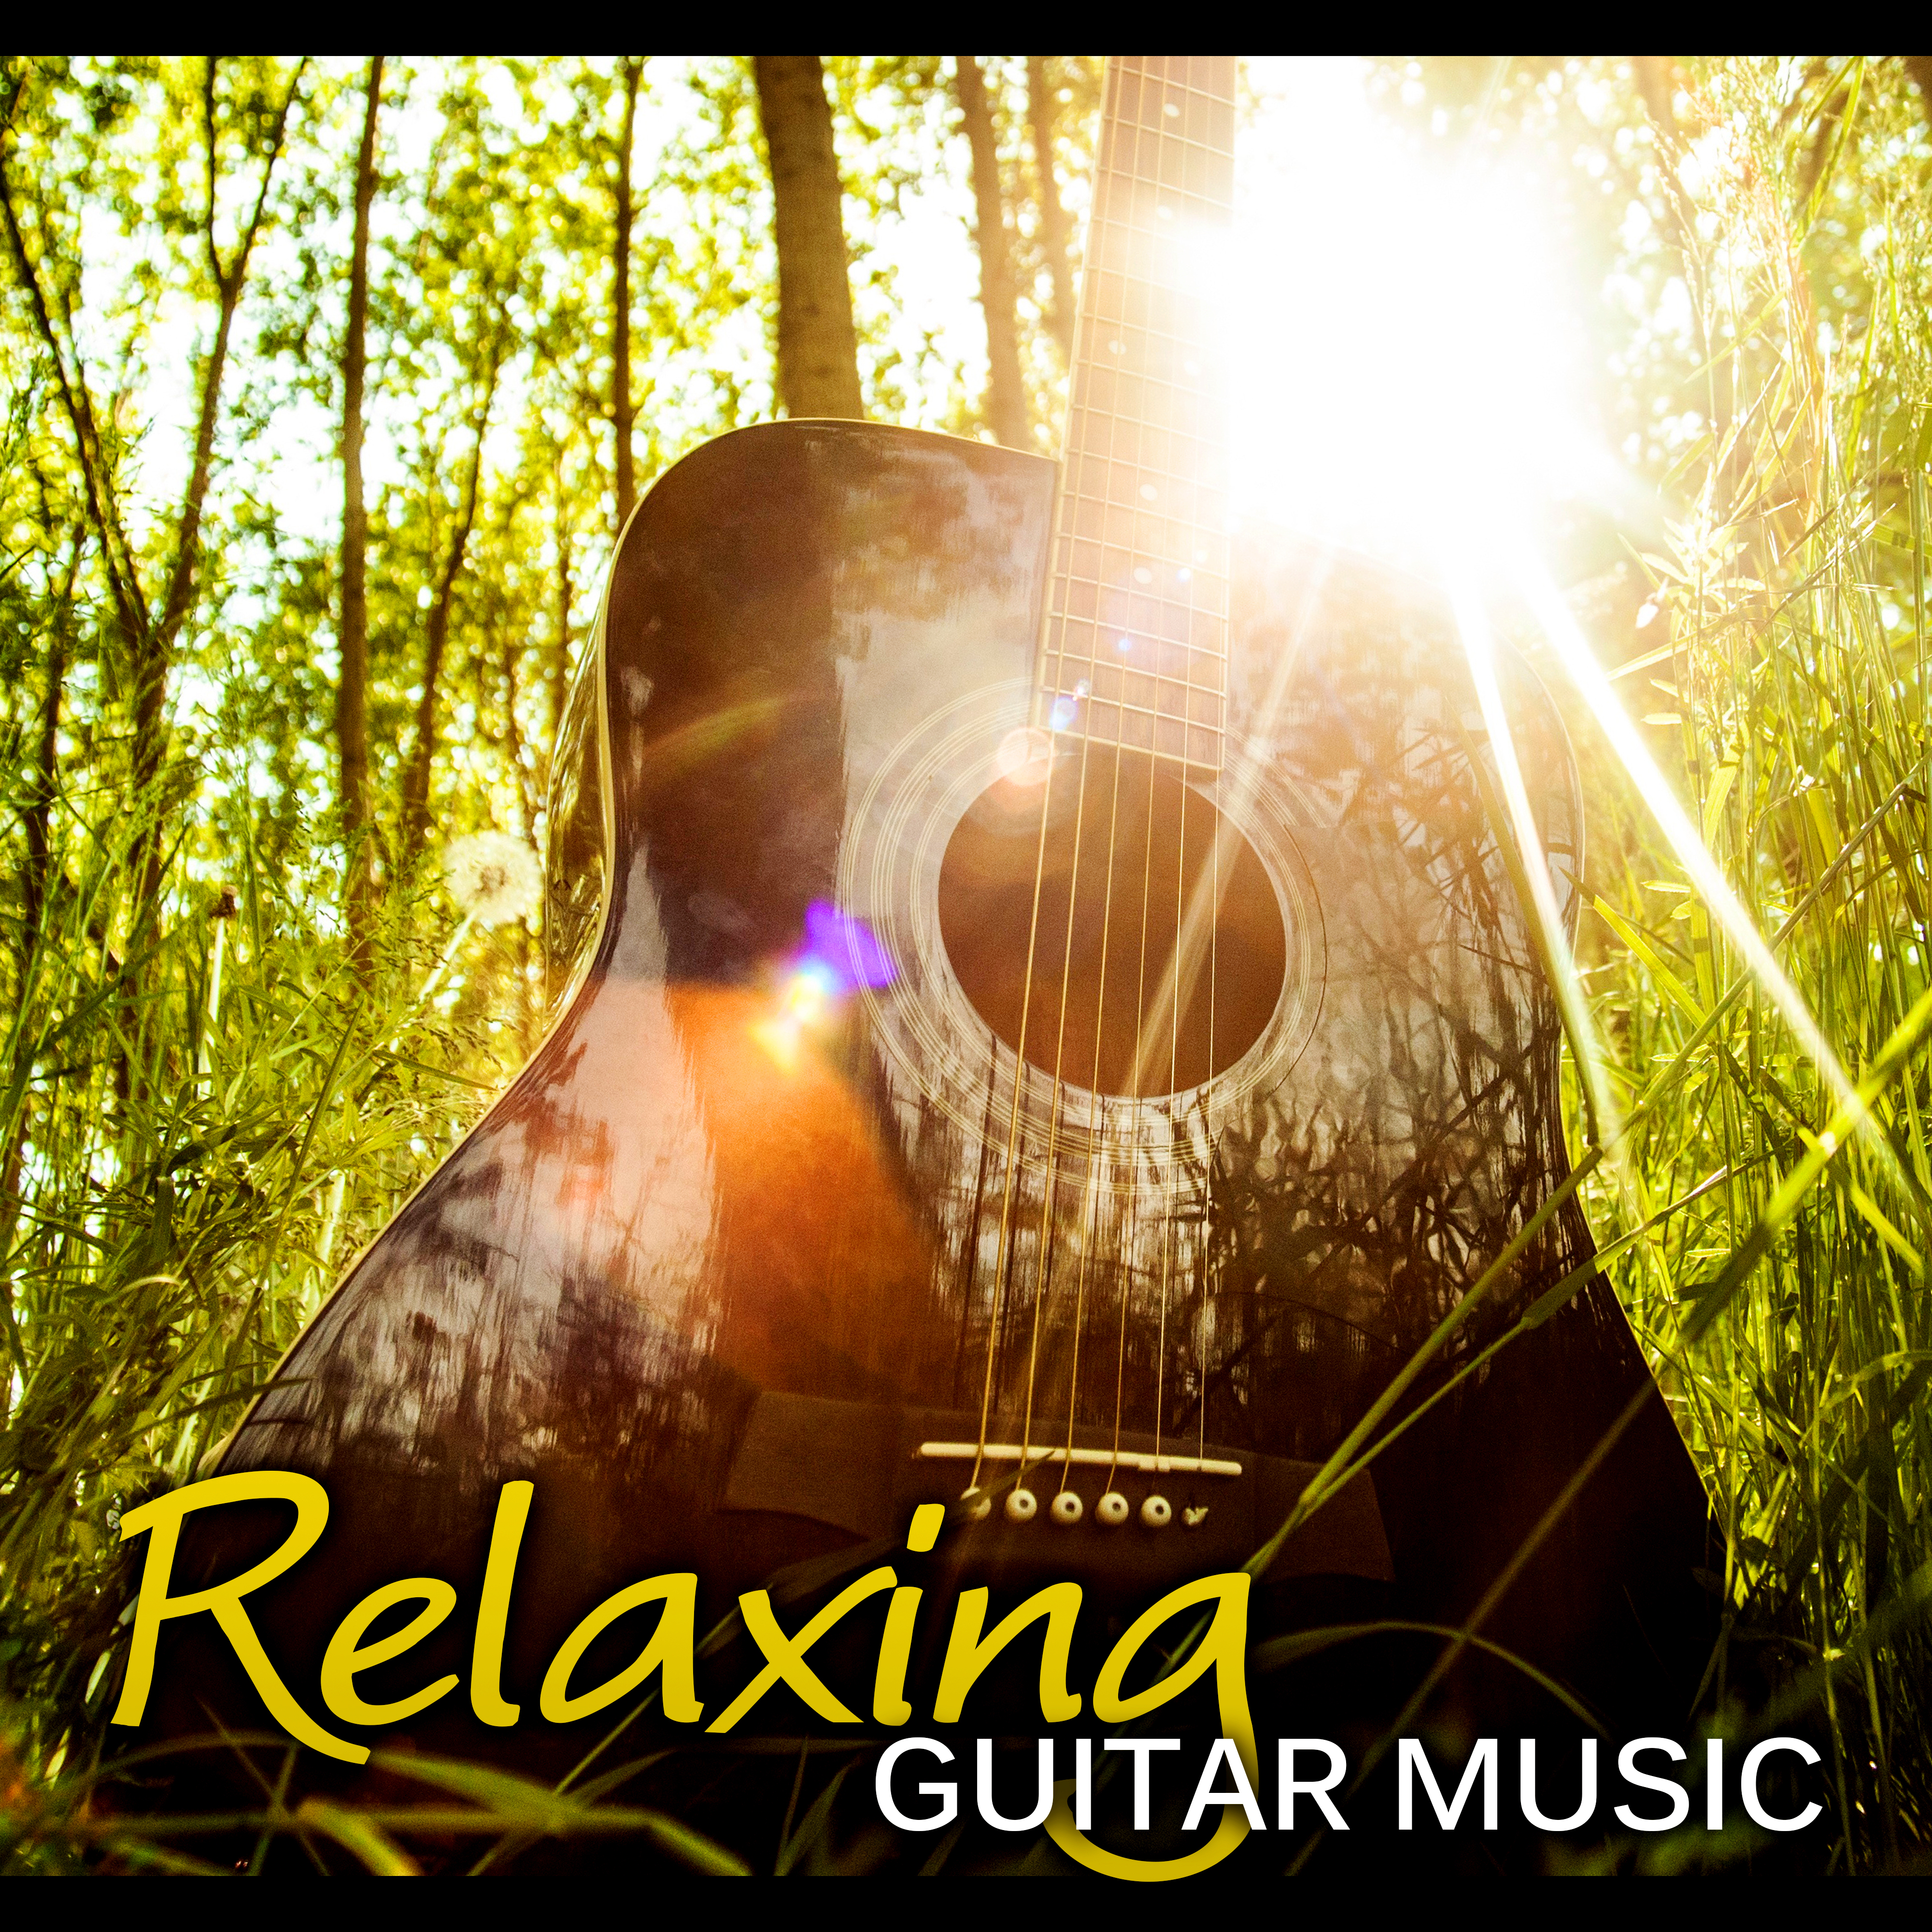 Relaxing Guitar Music  The Best Relaxing Music in the World, Acoustic Guitar, Smooth Jazz, Dinner Party Background Music, Spanish Guitar Instrumental Songs